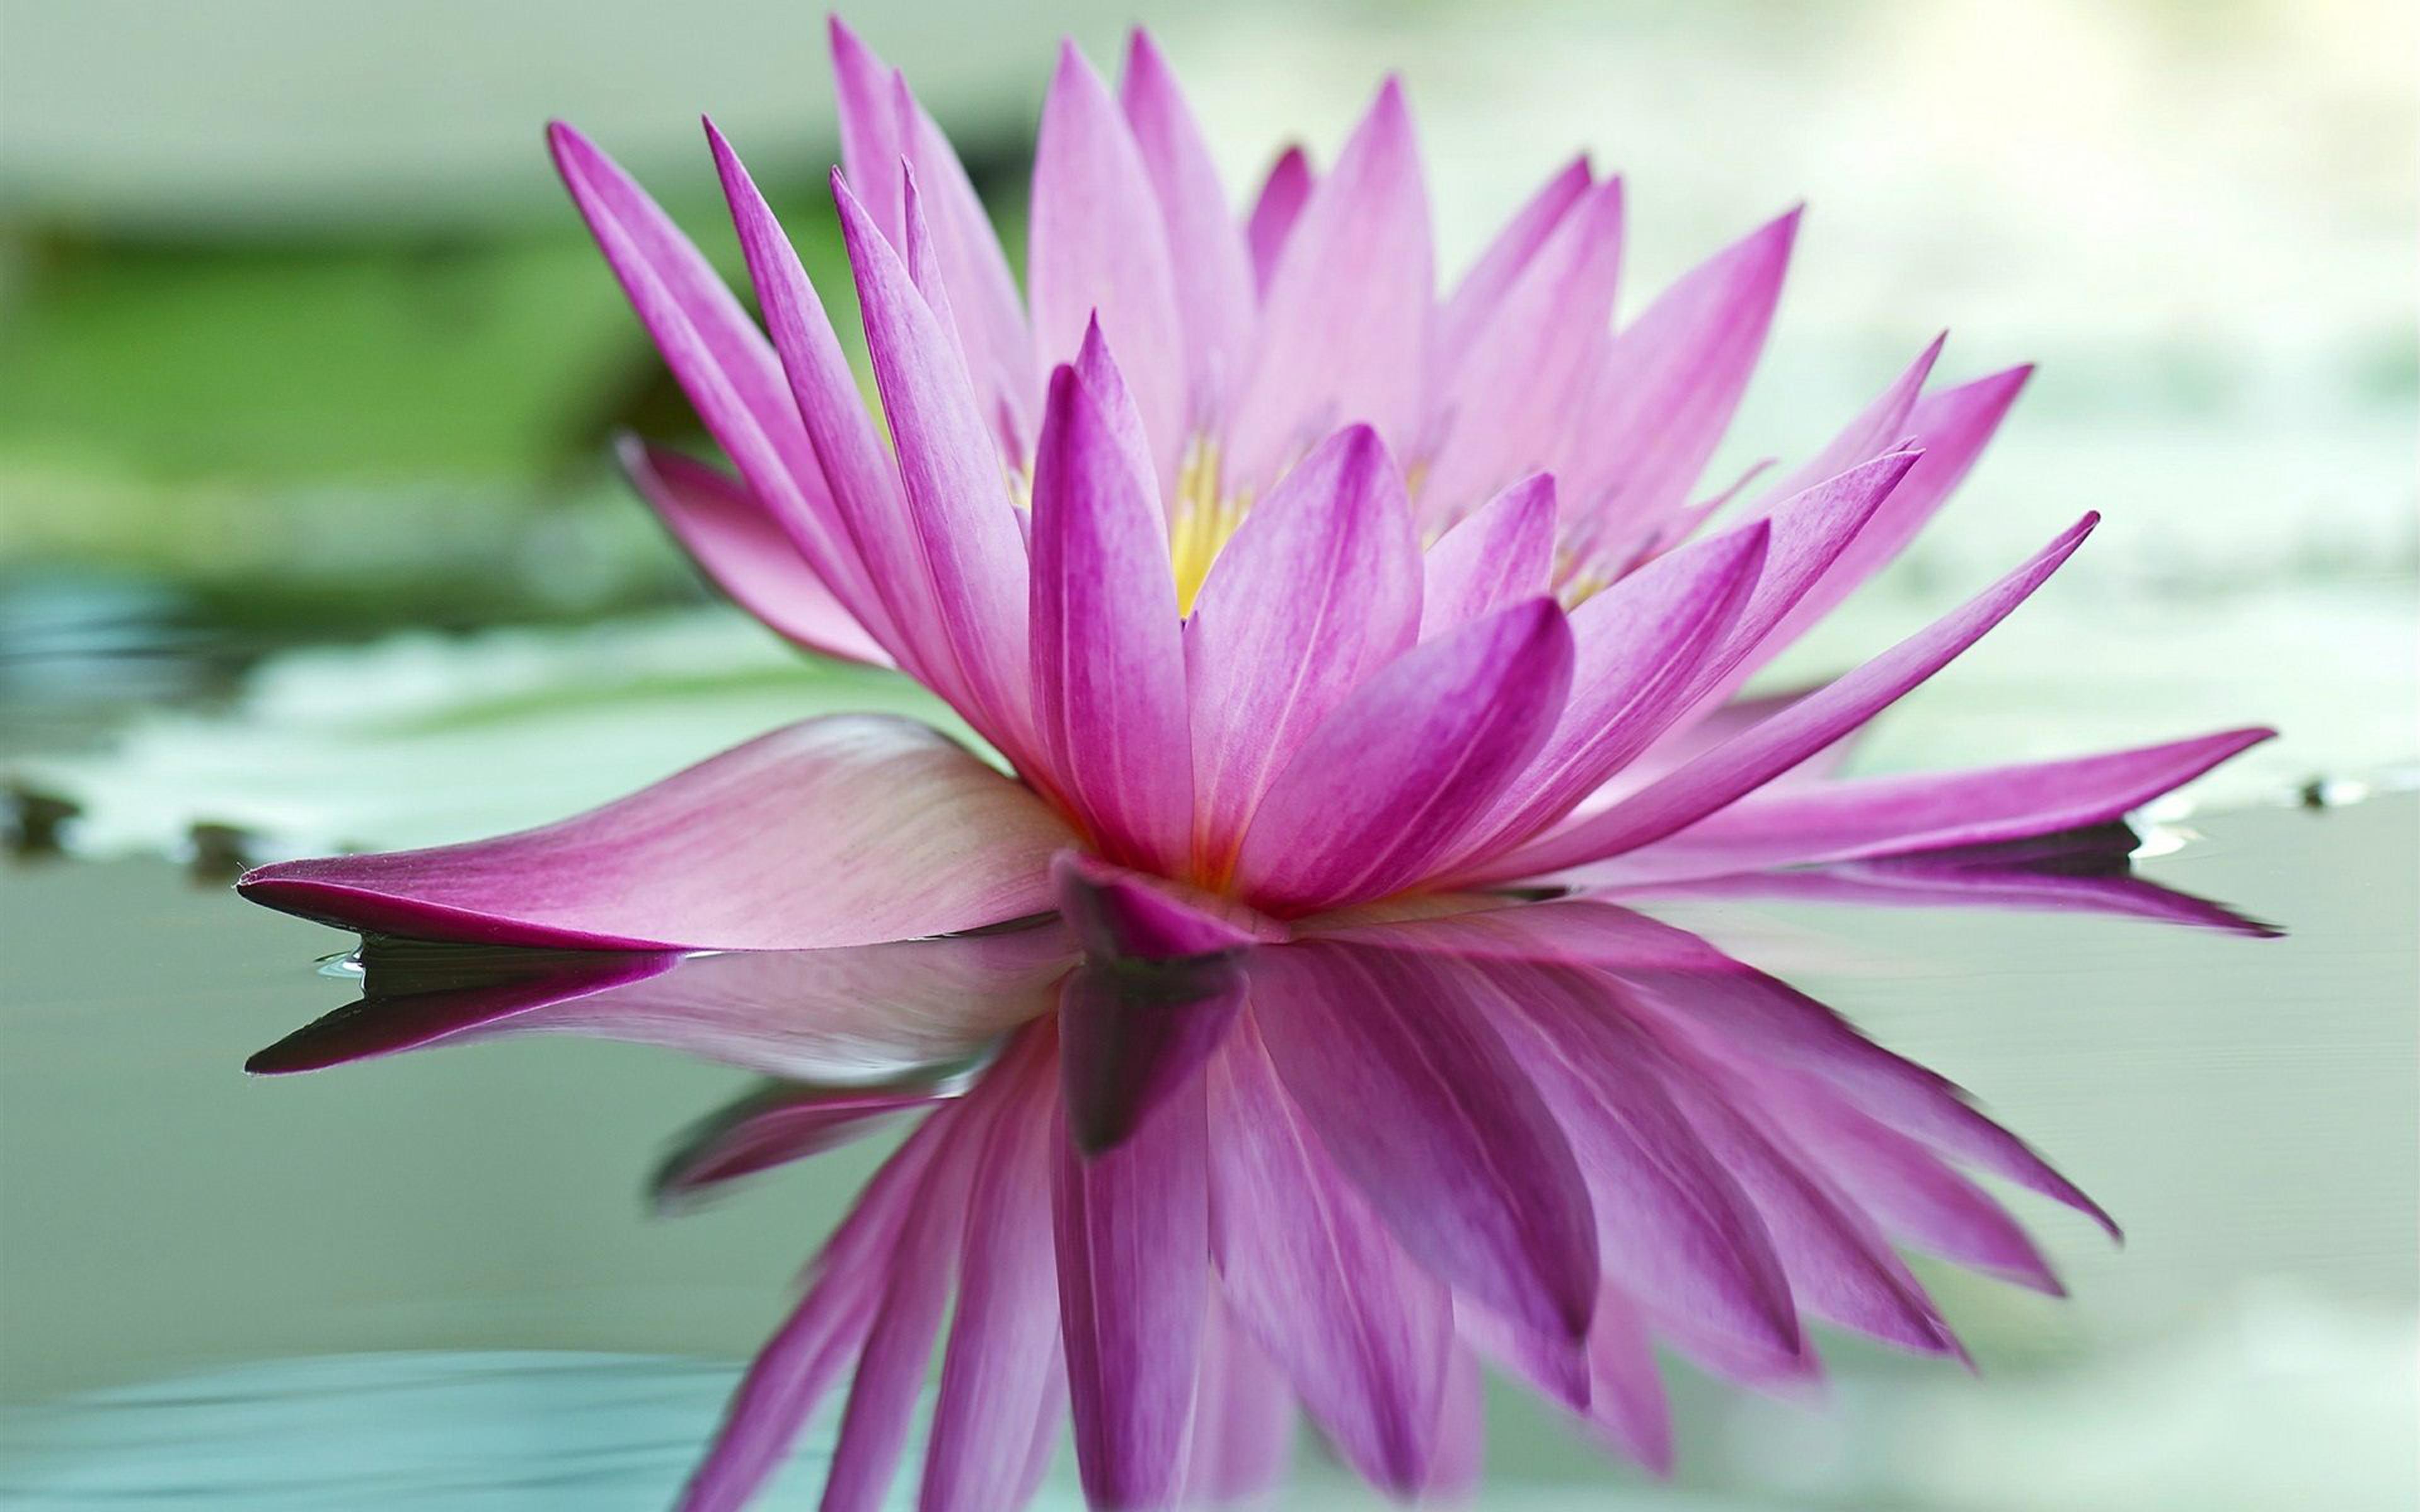 Pink Lotus Flower HD Wallpaper For Mobile Phones And Laptops